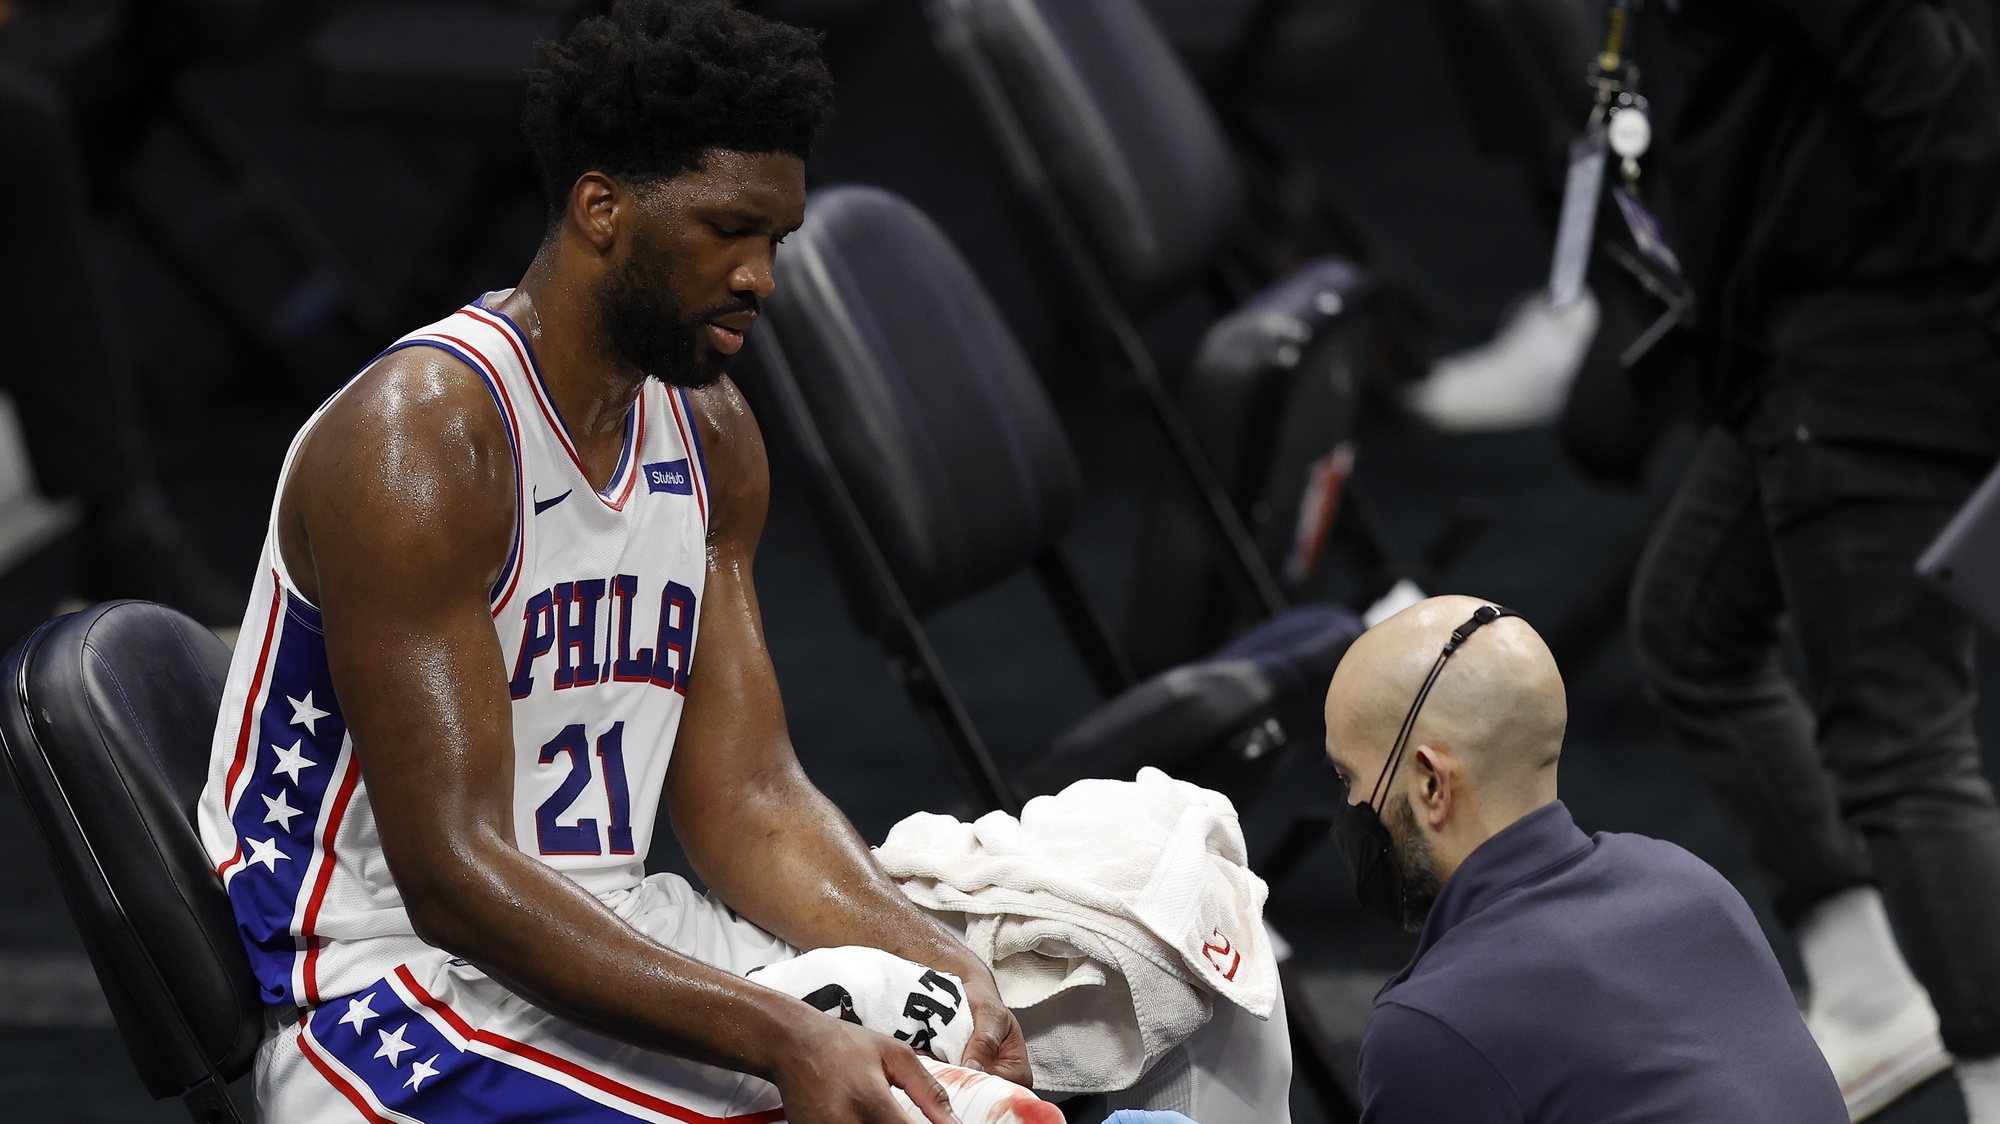 epa09000228 A trainer tends to Philadelphia 76ers center Joel Embiid (L) after a play against the Sacramento Kings during the second half of the NBA basketball game between the Philadelphia 76ers and Sacramento Kings at Golden 1 Center in Sacramento, California, USA, 09 February 2021.  EPA/JOHN G. MABANGLO SHUTTERSTOCK OUT